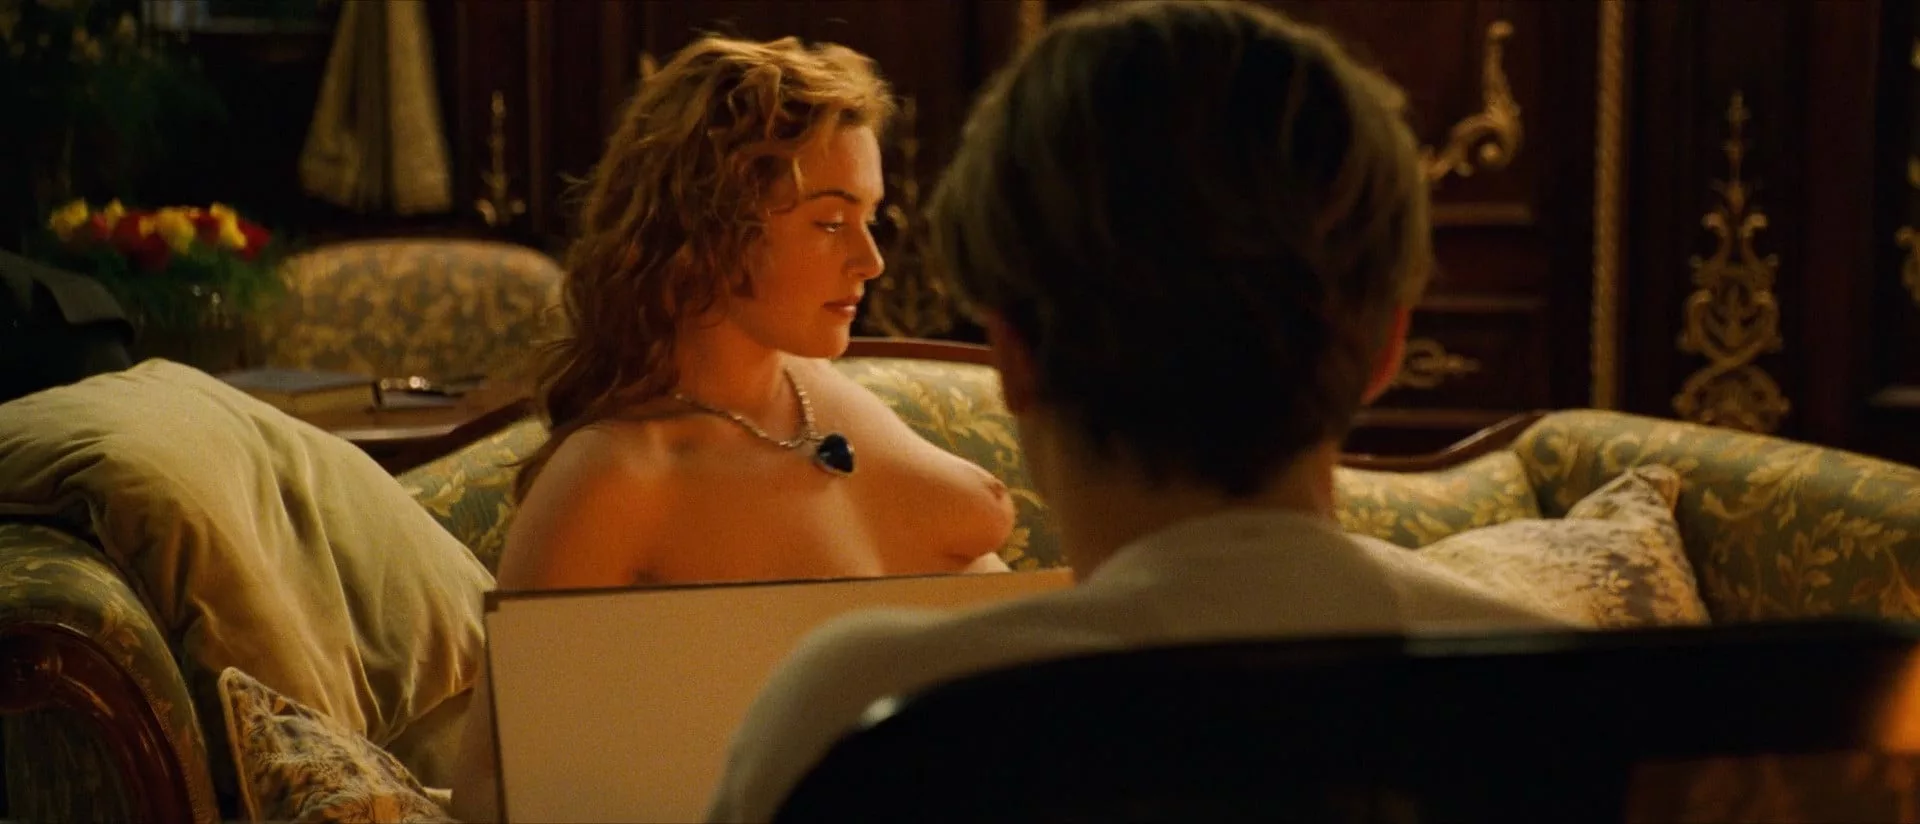 Kate Winslet breasts in Titanic